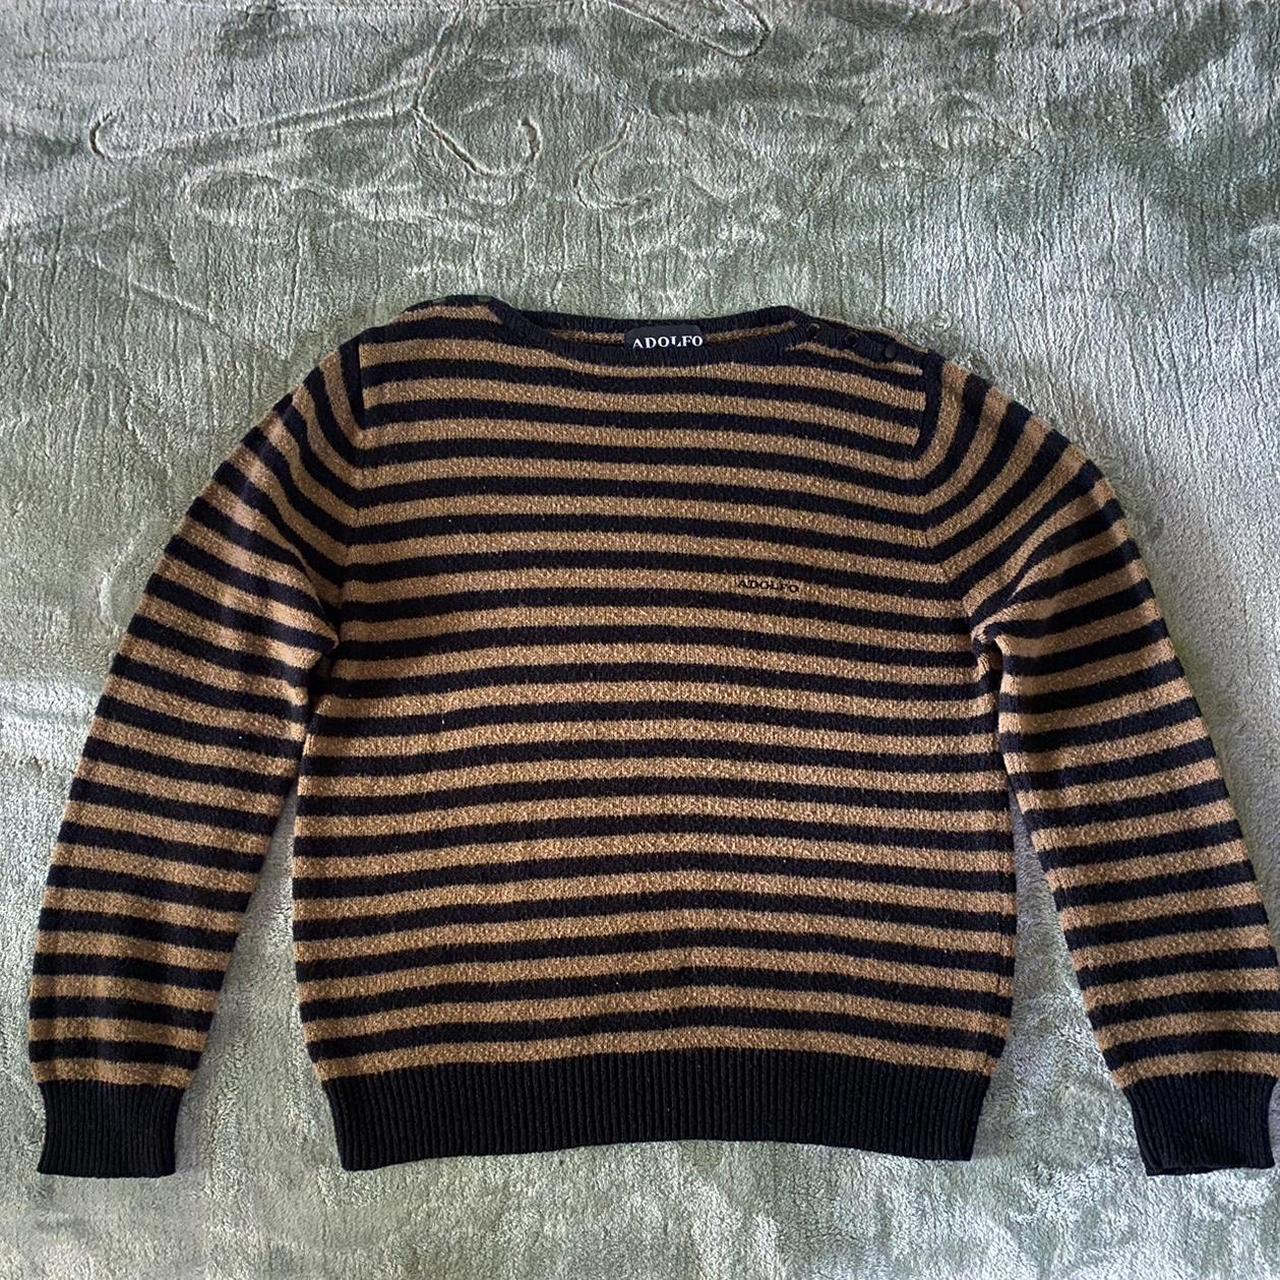 Black & Brown striped sweater Labeled Large but fits... - Depop